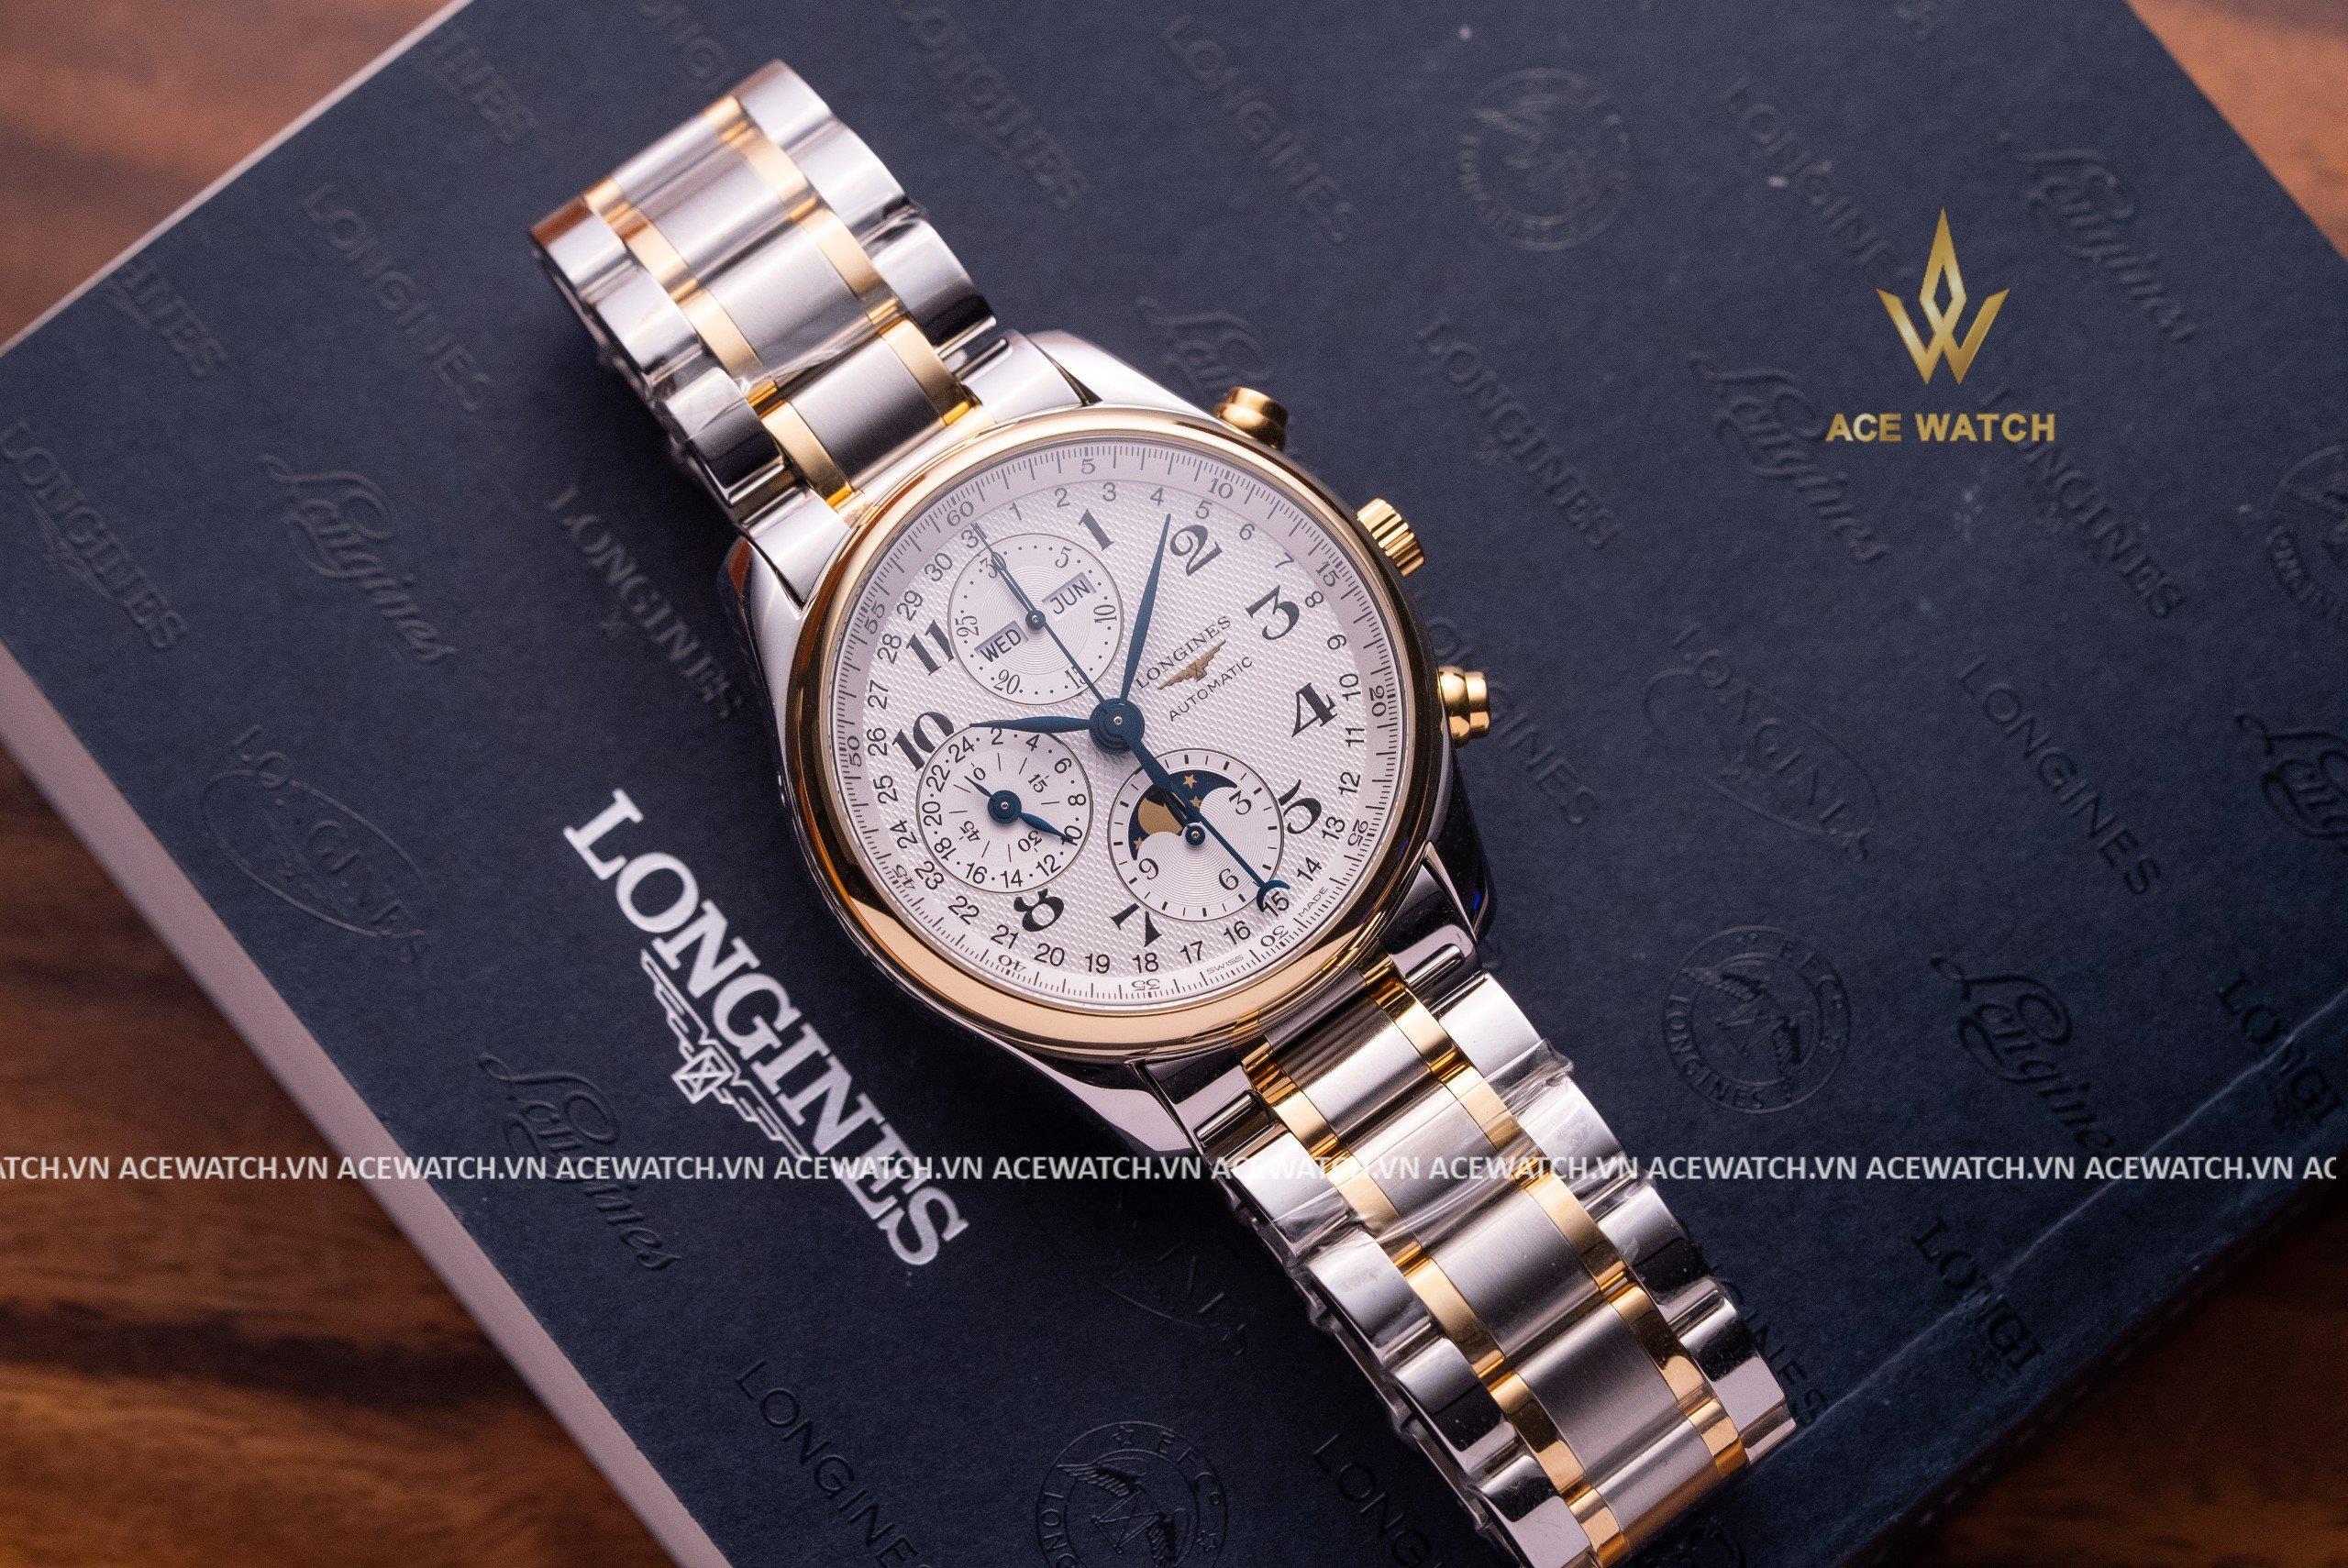 LONGINES MASTER COLLECTION L26735787